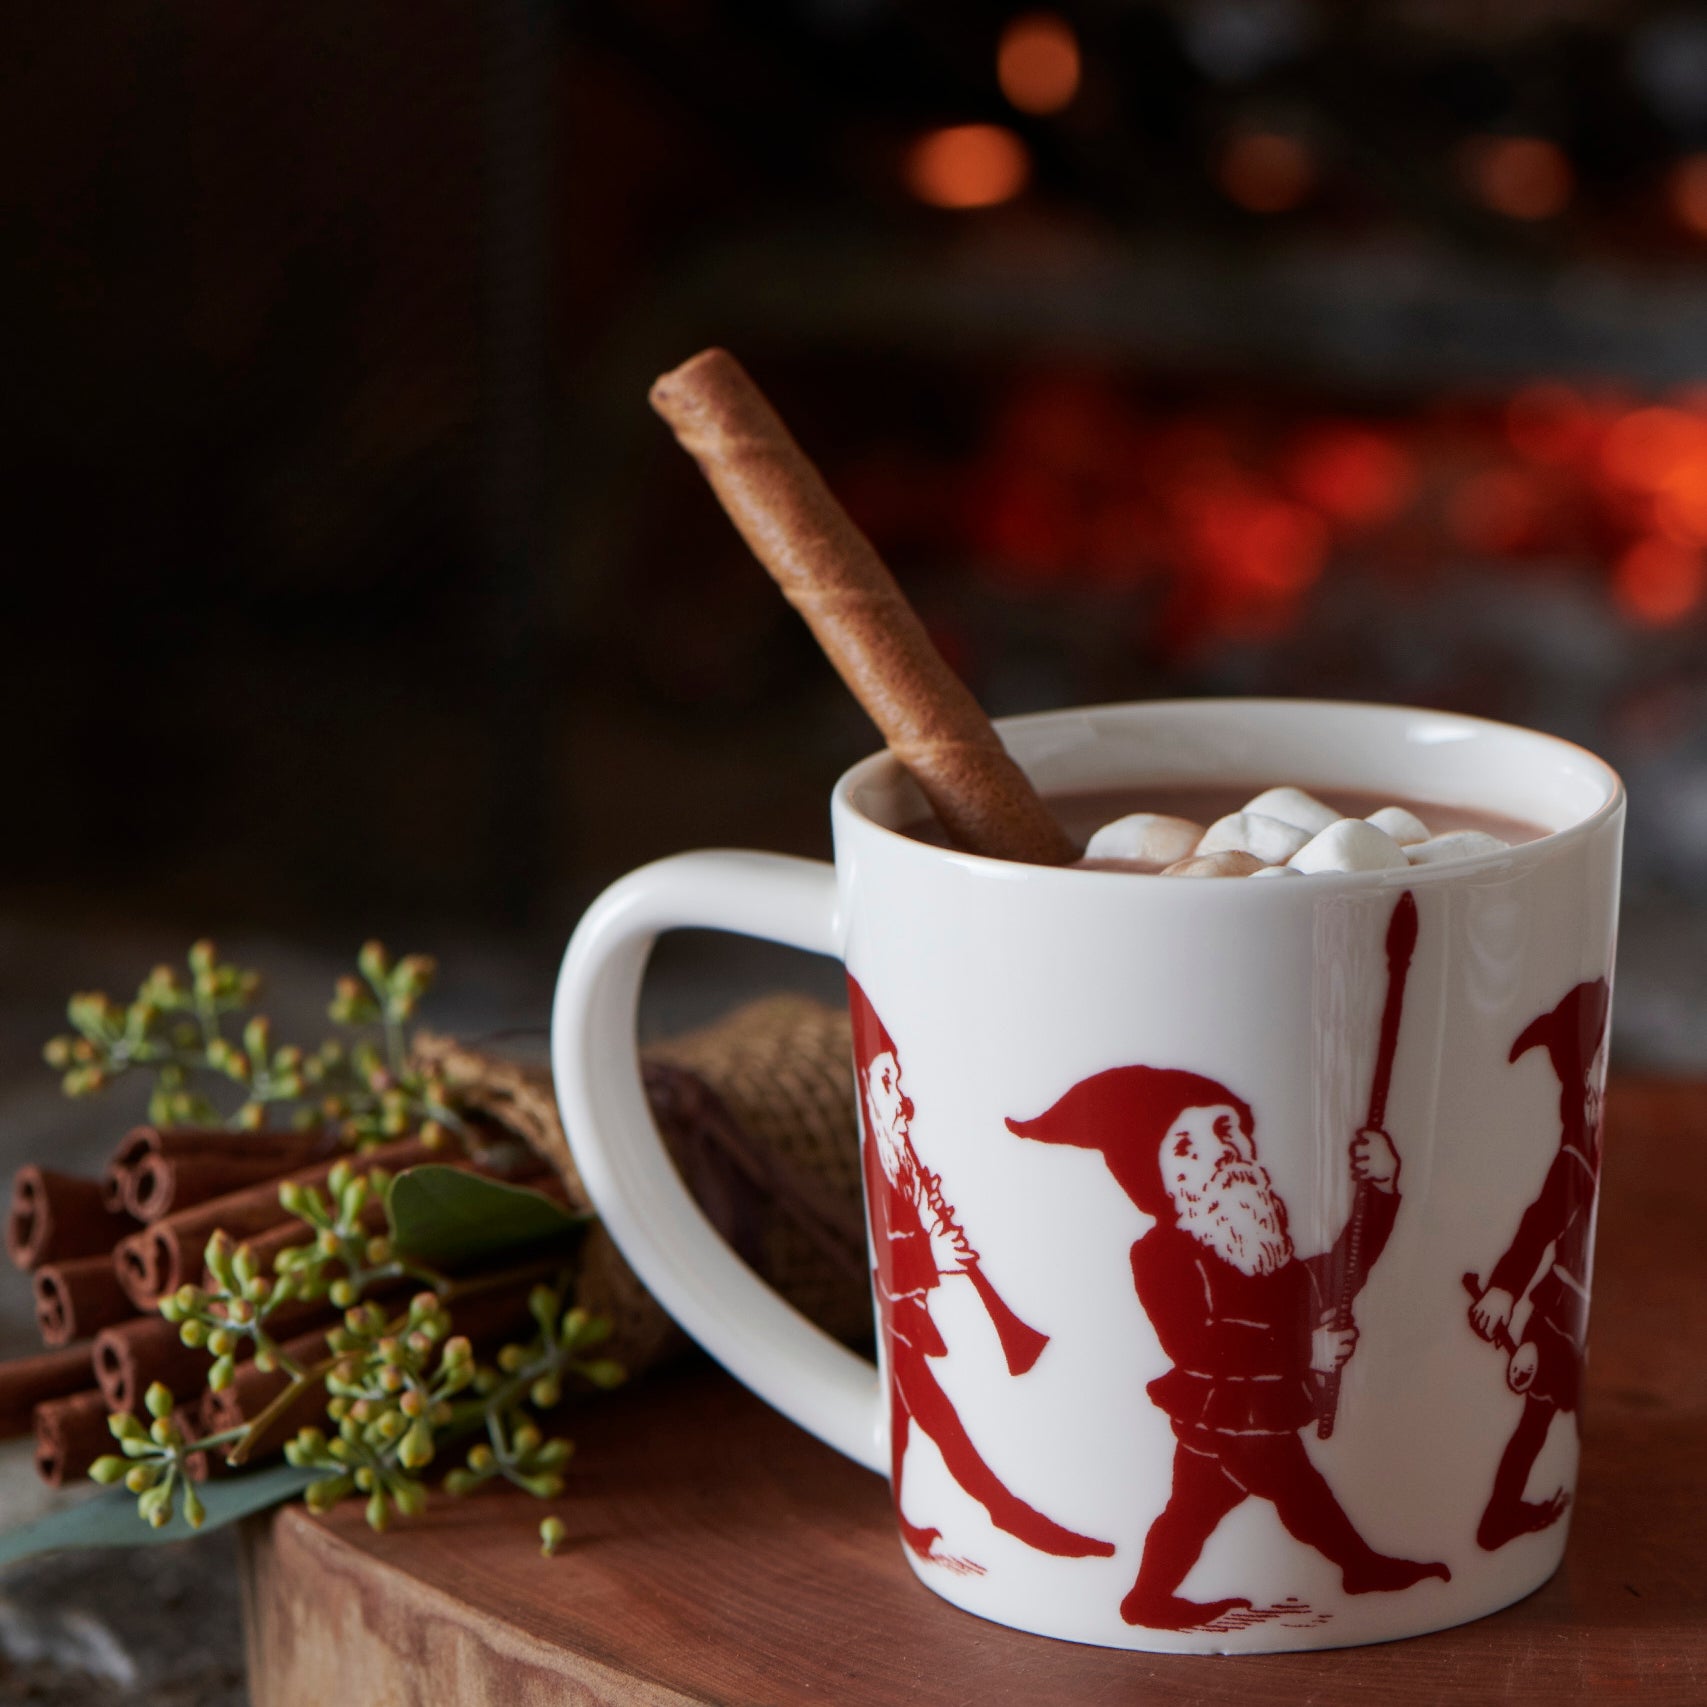 White porcelain Elves Mug with red illustrations of playful elves marching, one playing a drum and another carrying a basket. Perfect for the Caskata Artisanal Home holiday collection.